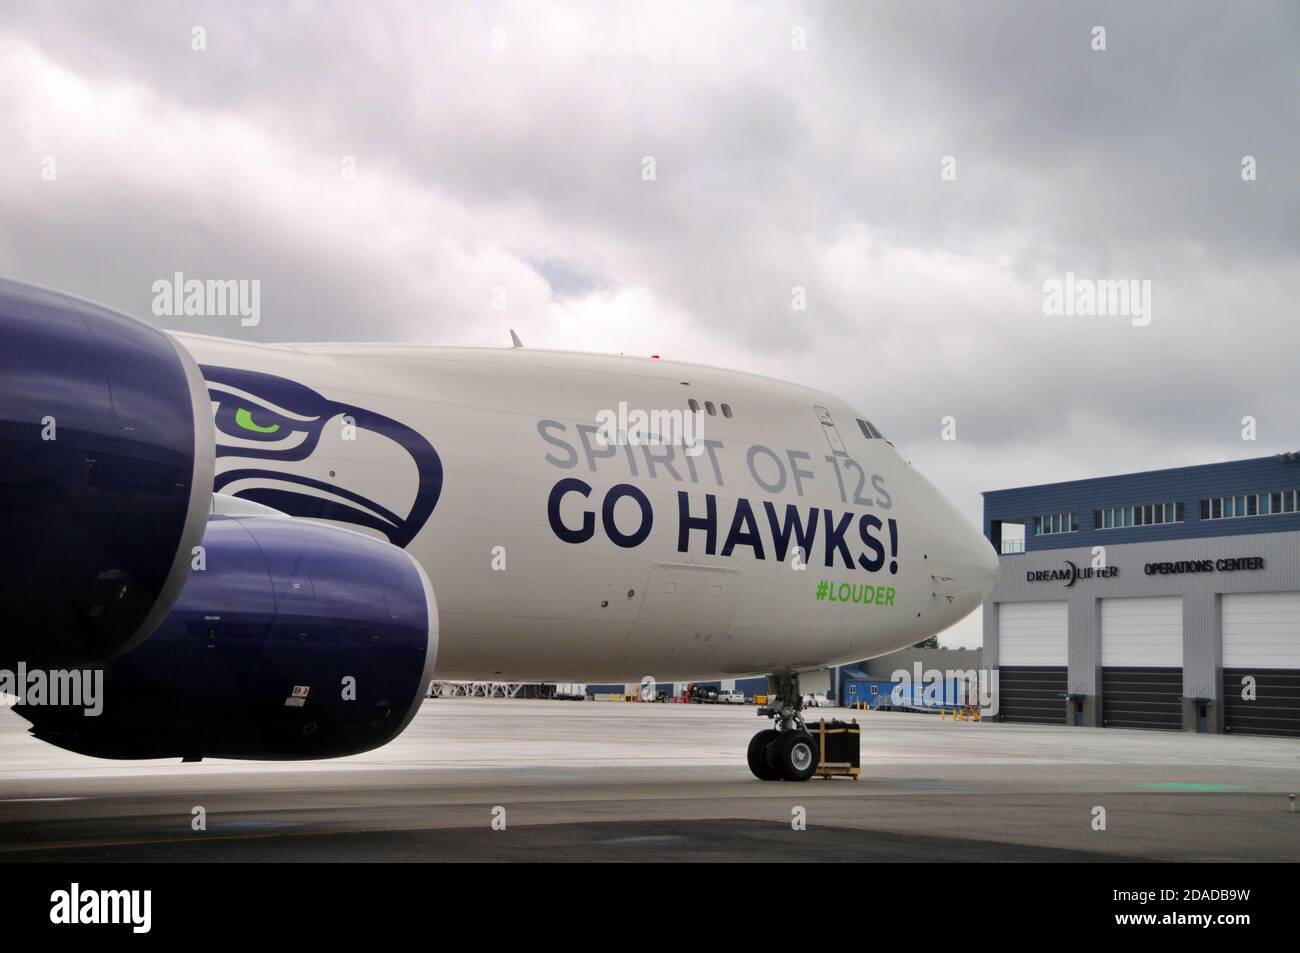 Seahawks Football team Boeing 747-8 Freighter parking in front of Dreamlifter Operations Center building at Plainfield Airport in Everett, WA Stock Photo